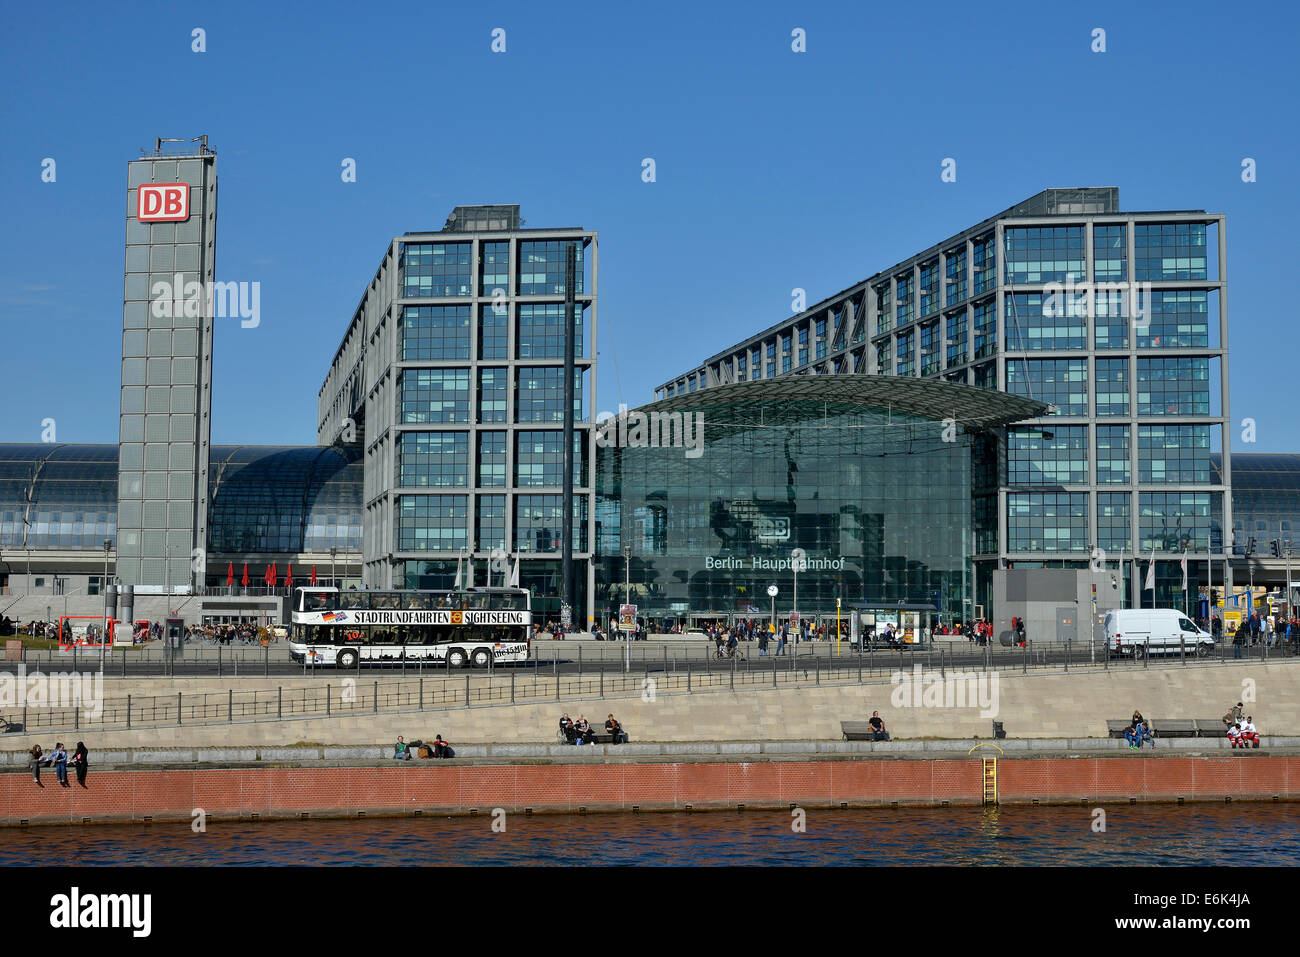 Sightseeing bus in front of Berlin Hauptbahnhof main railway station, Spree River at the front, Berlin, Germany Stock Photo